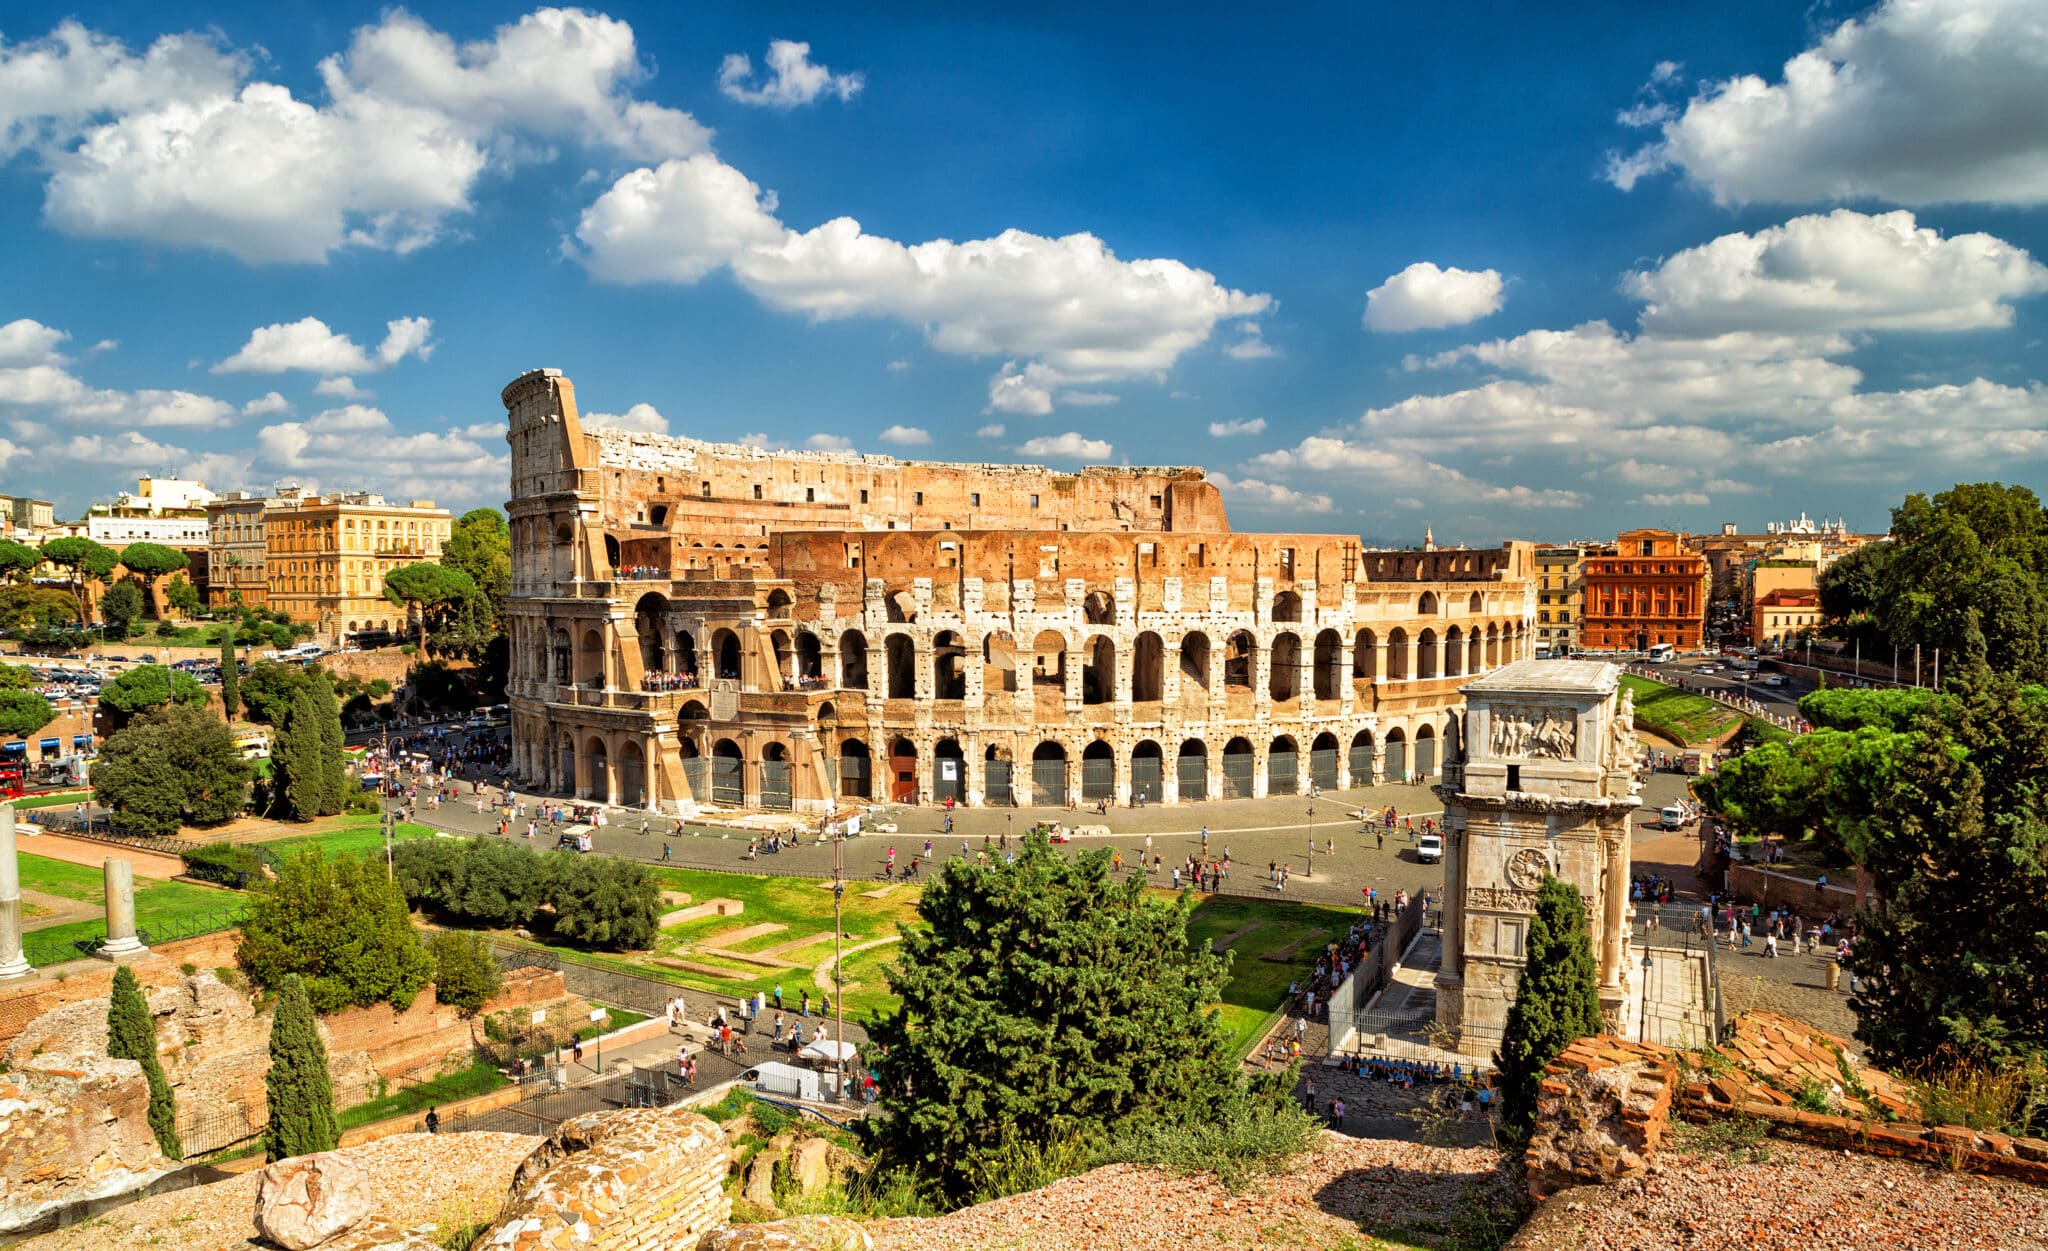 Colosseum  in Rome, Italy